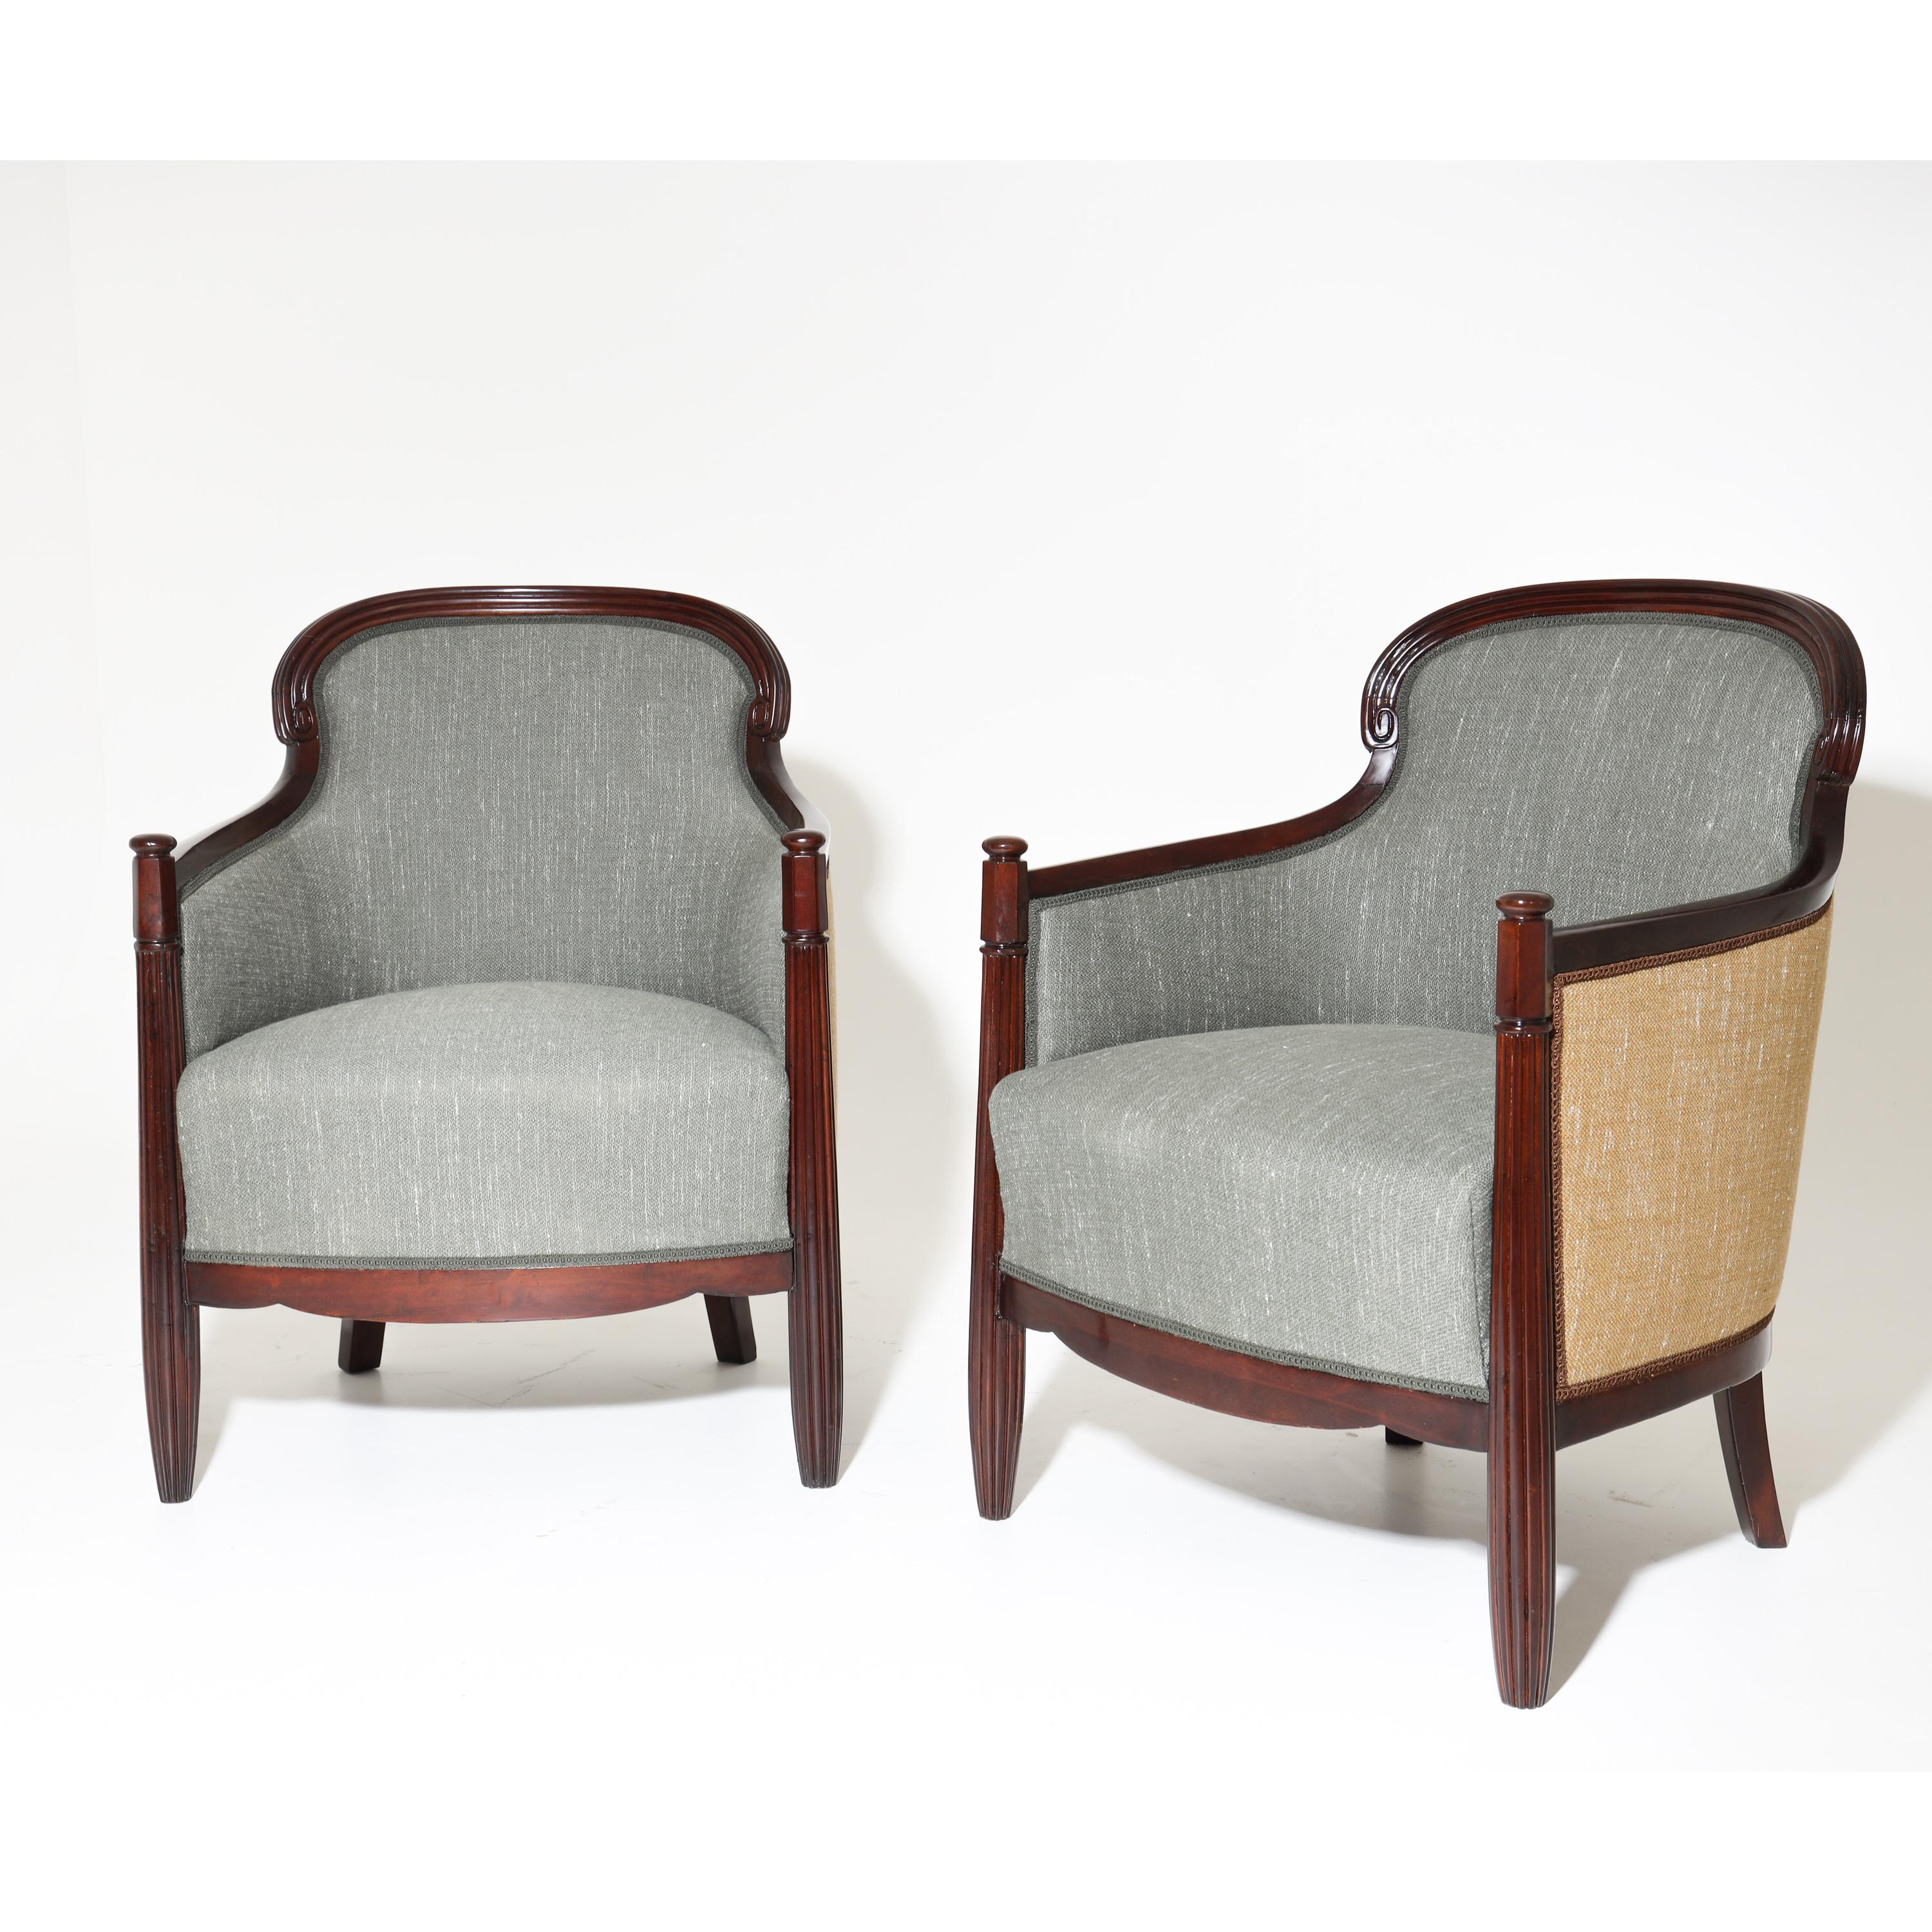 Pair of mahogany bergères on fluted conical front legs and slightly flared rear legs. The rounded backrest leads to the lower armrests, which end at the extended front legs. The armchairs are upholstered on all sides and were newly covered with a